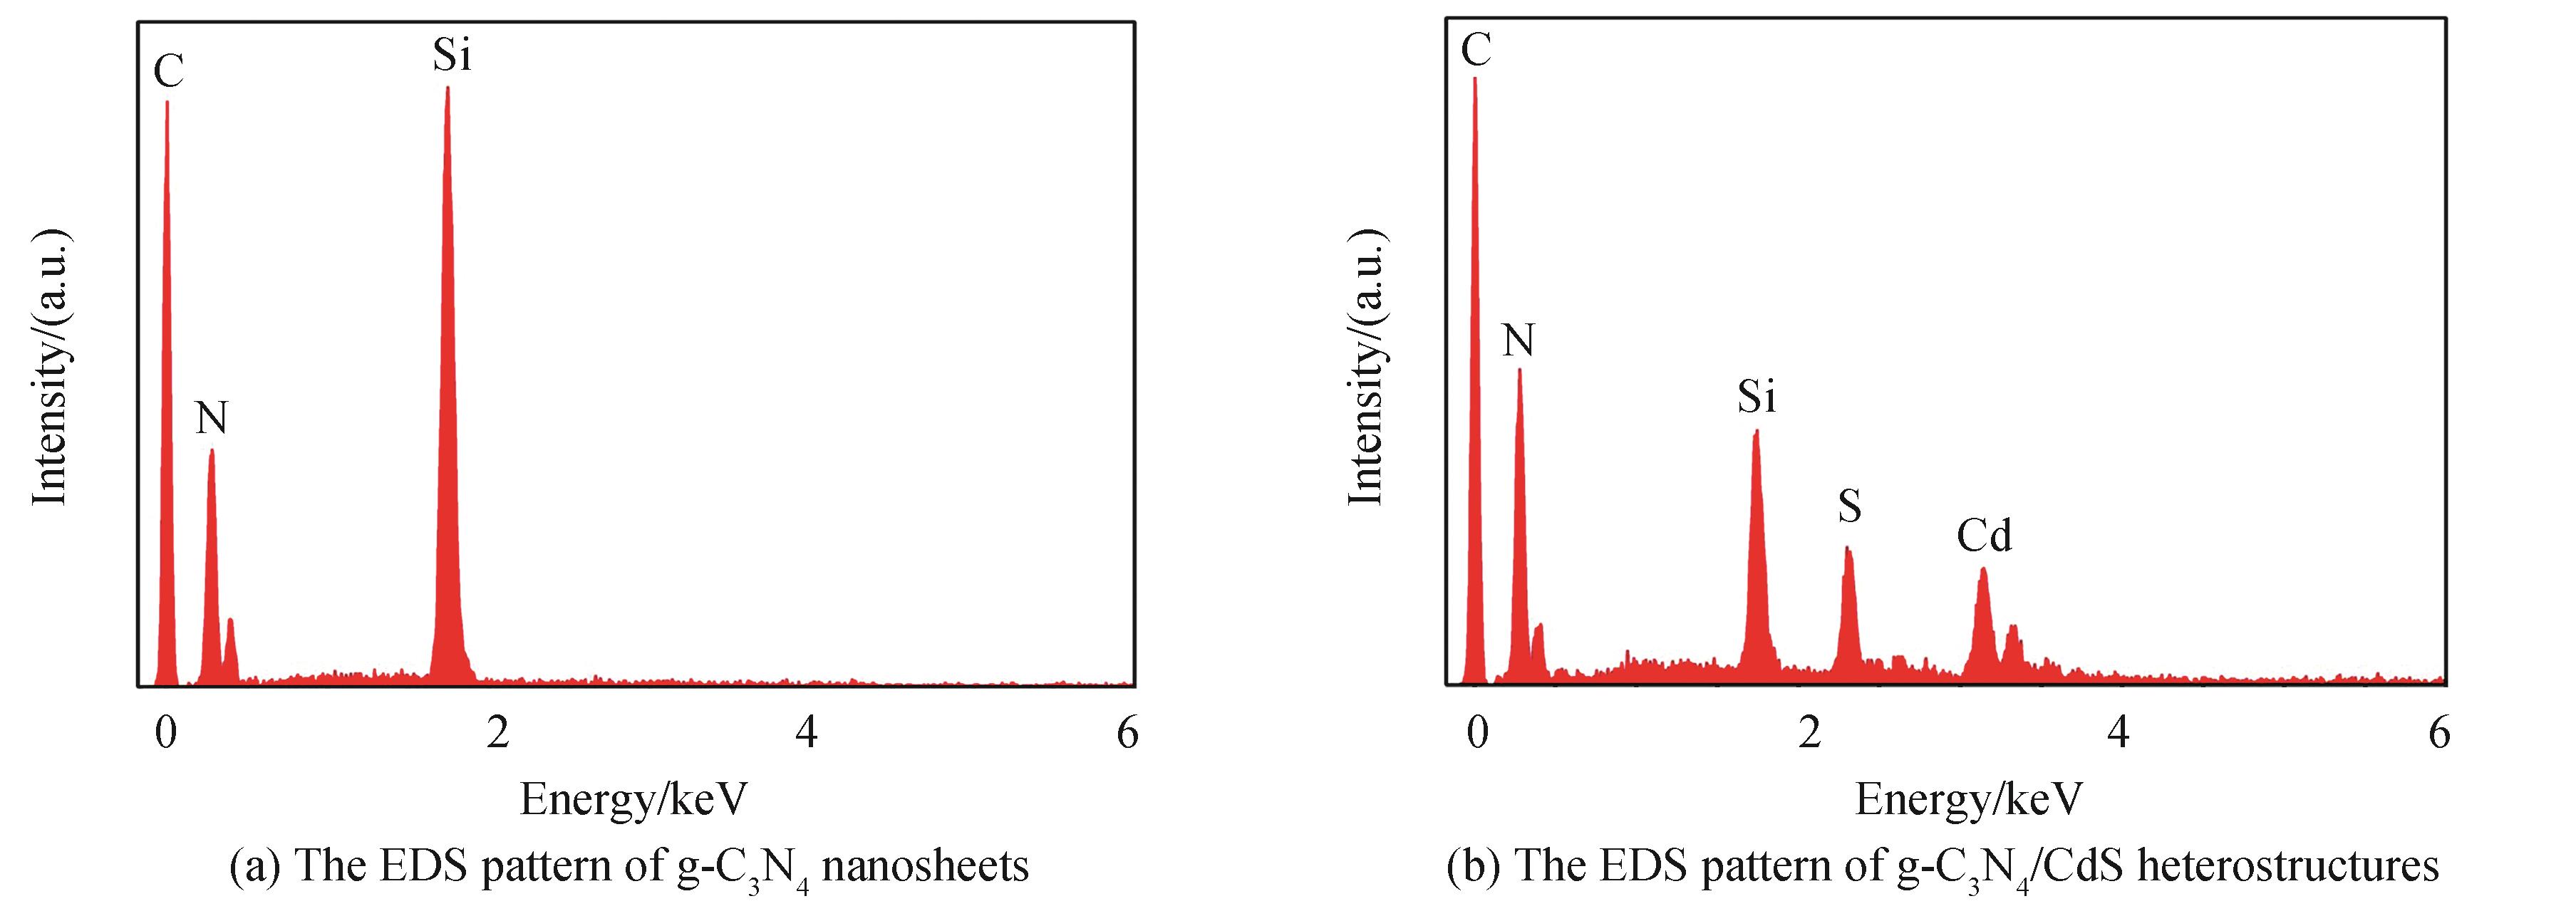 The EDS patterns of g-C3N4 nanosheets and g-C3N4/CdS heterostructures